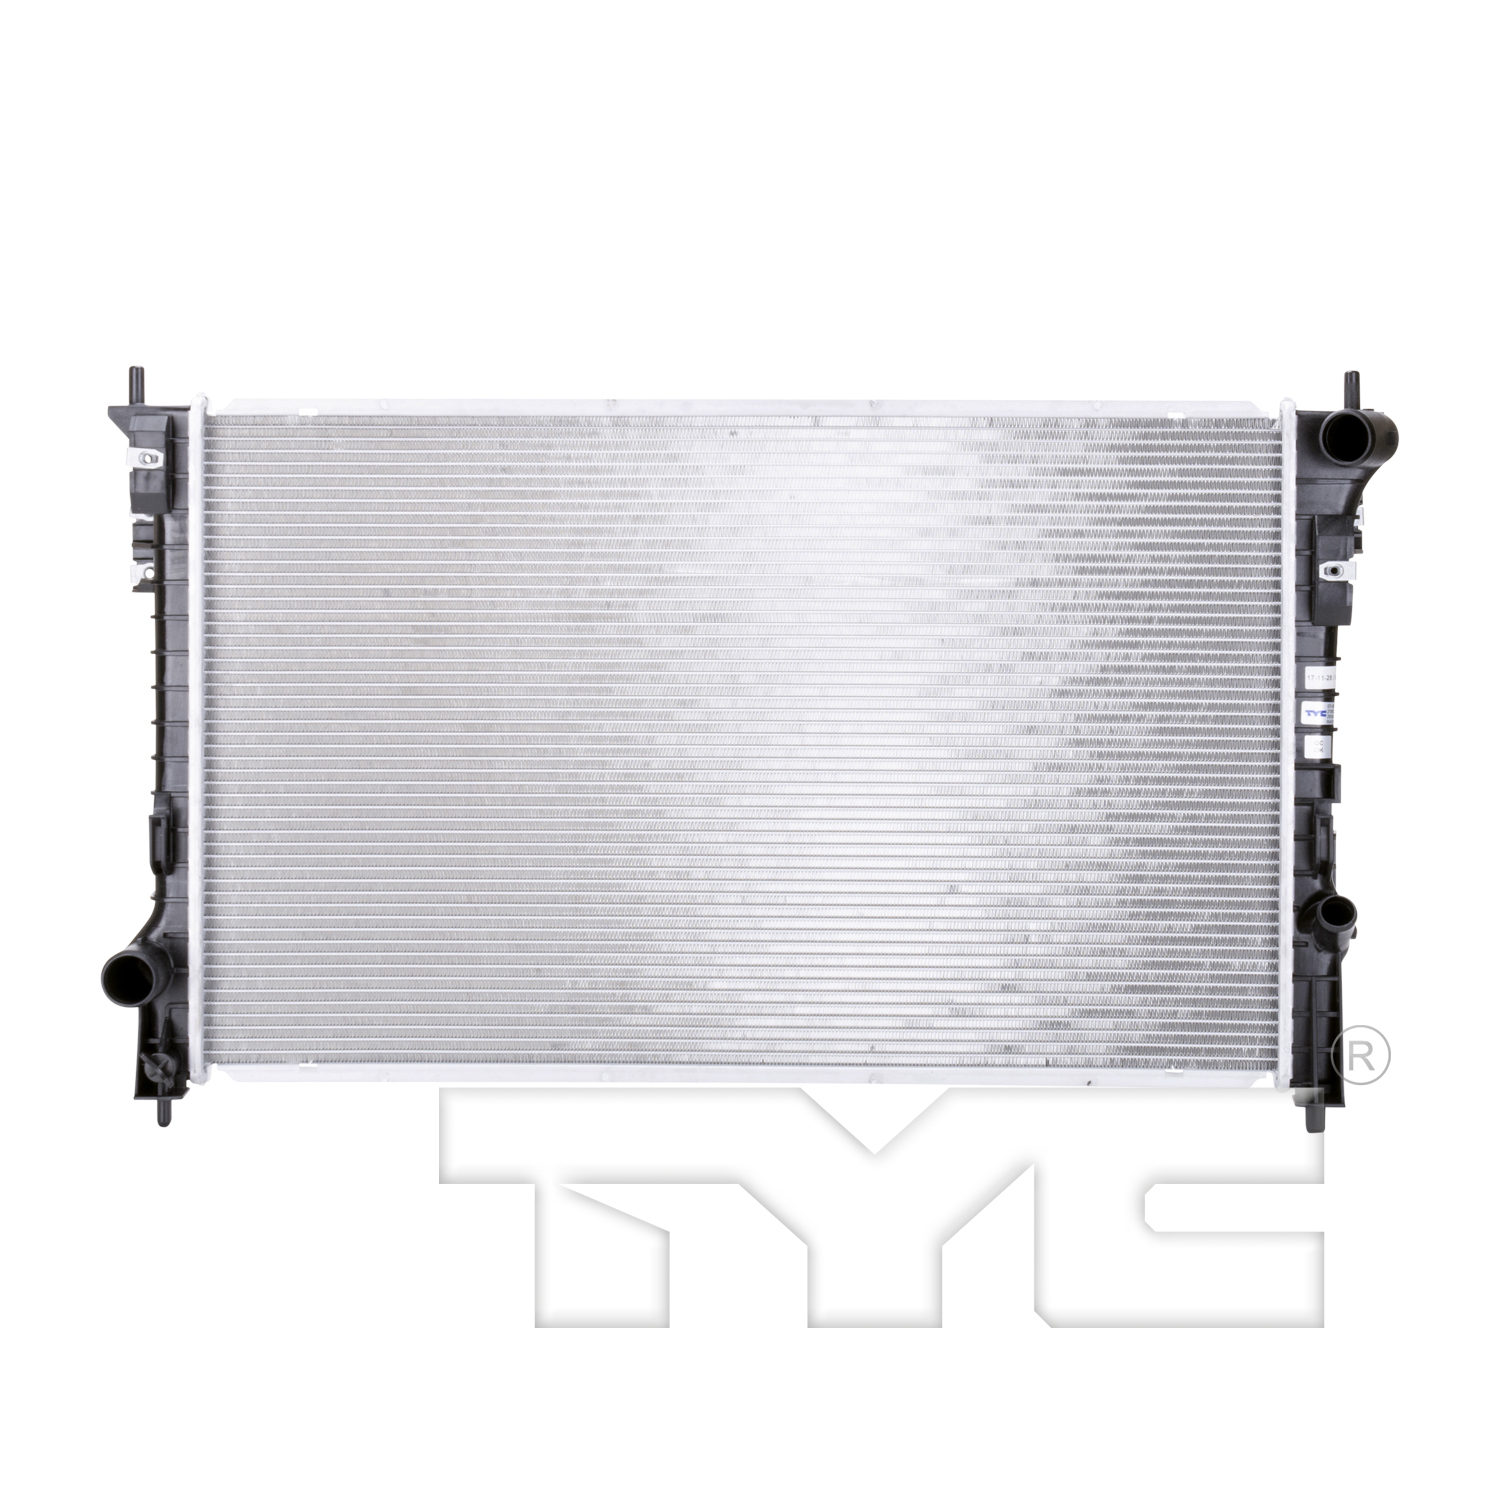 Aftermarket RADIATORS for LINCOLN - MKX, MKX,07-15,Radiator assembly